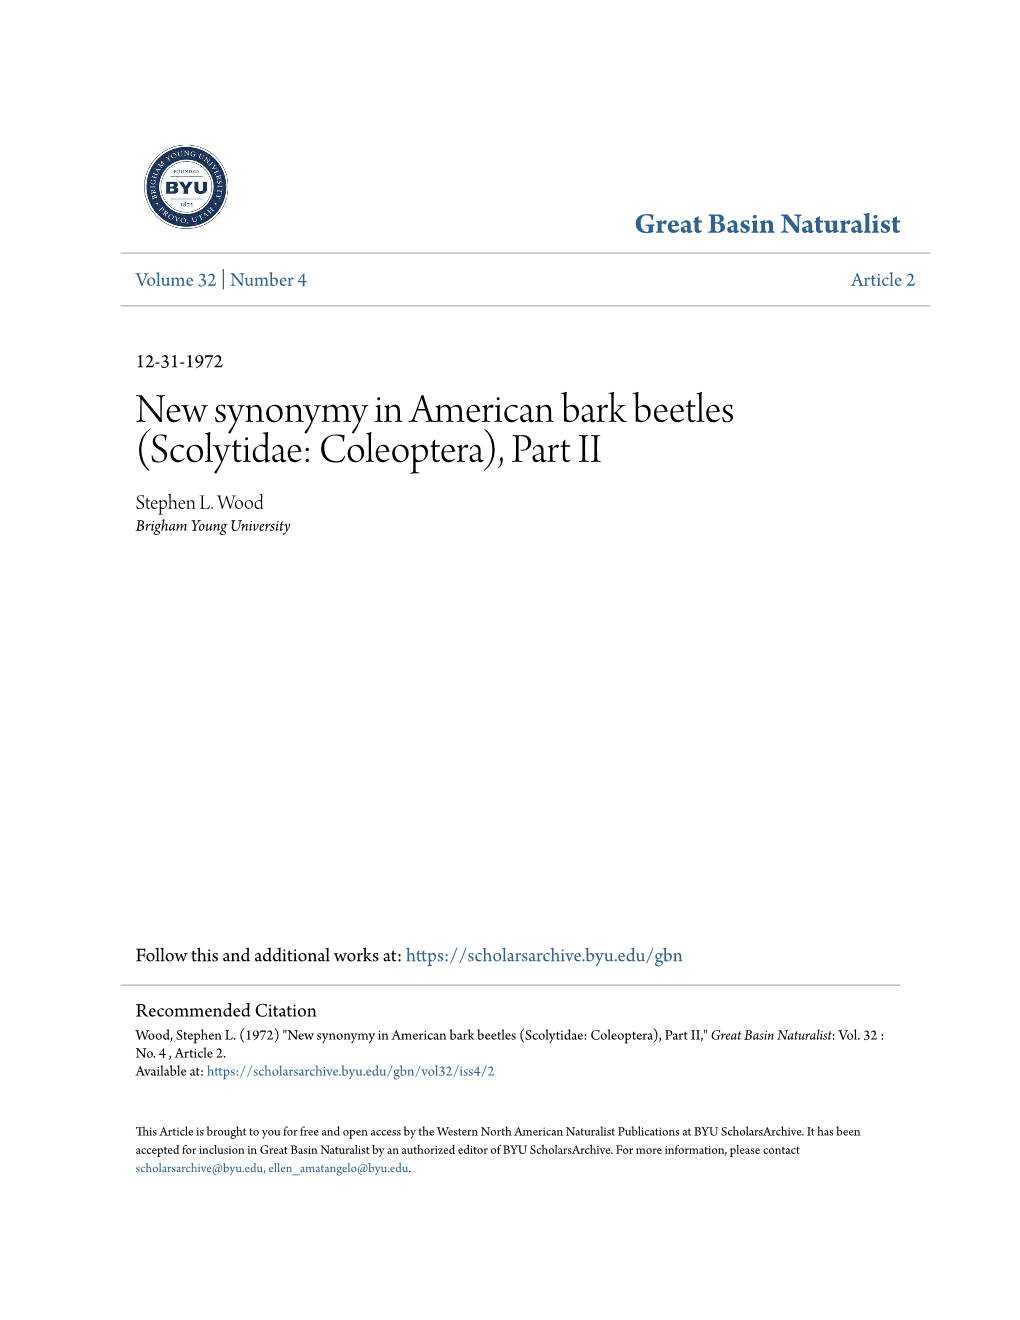 New Synonymy in American Bark Beetles (Scolytidae: Coleoptera), Part II Stephen L